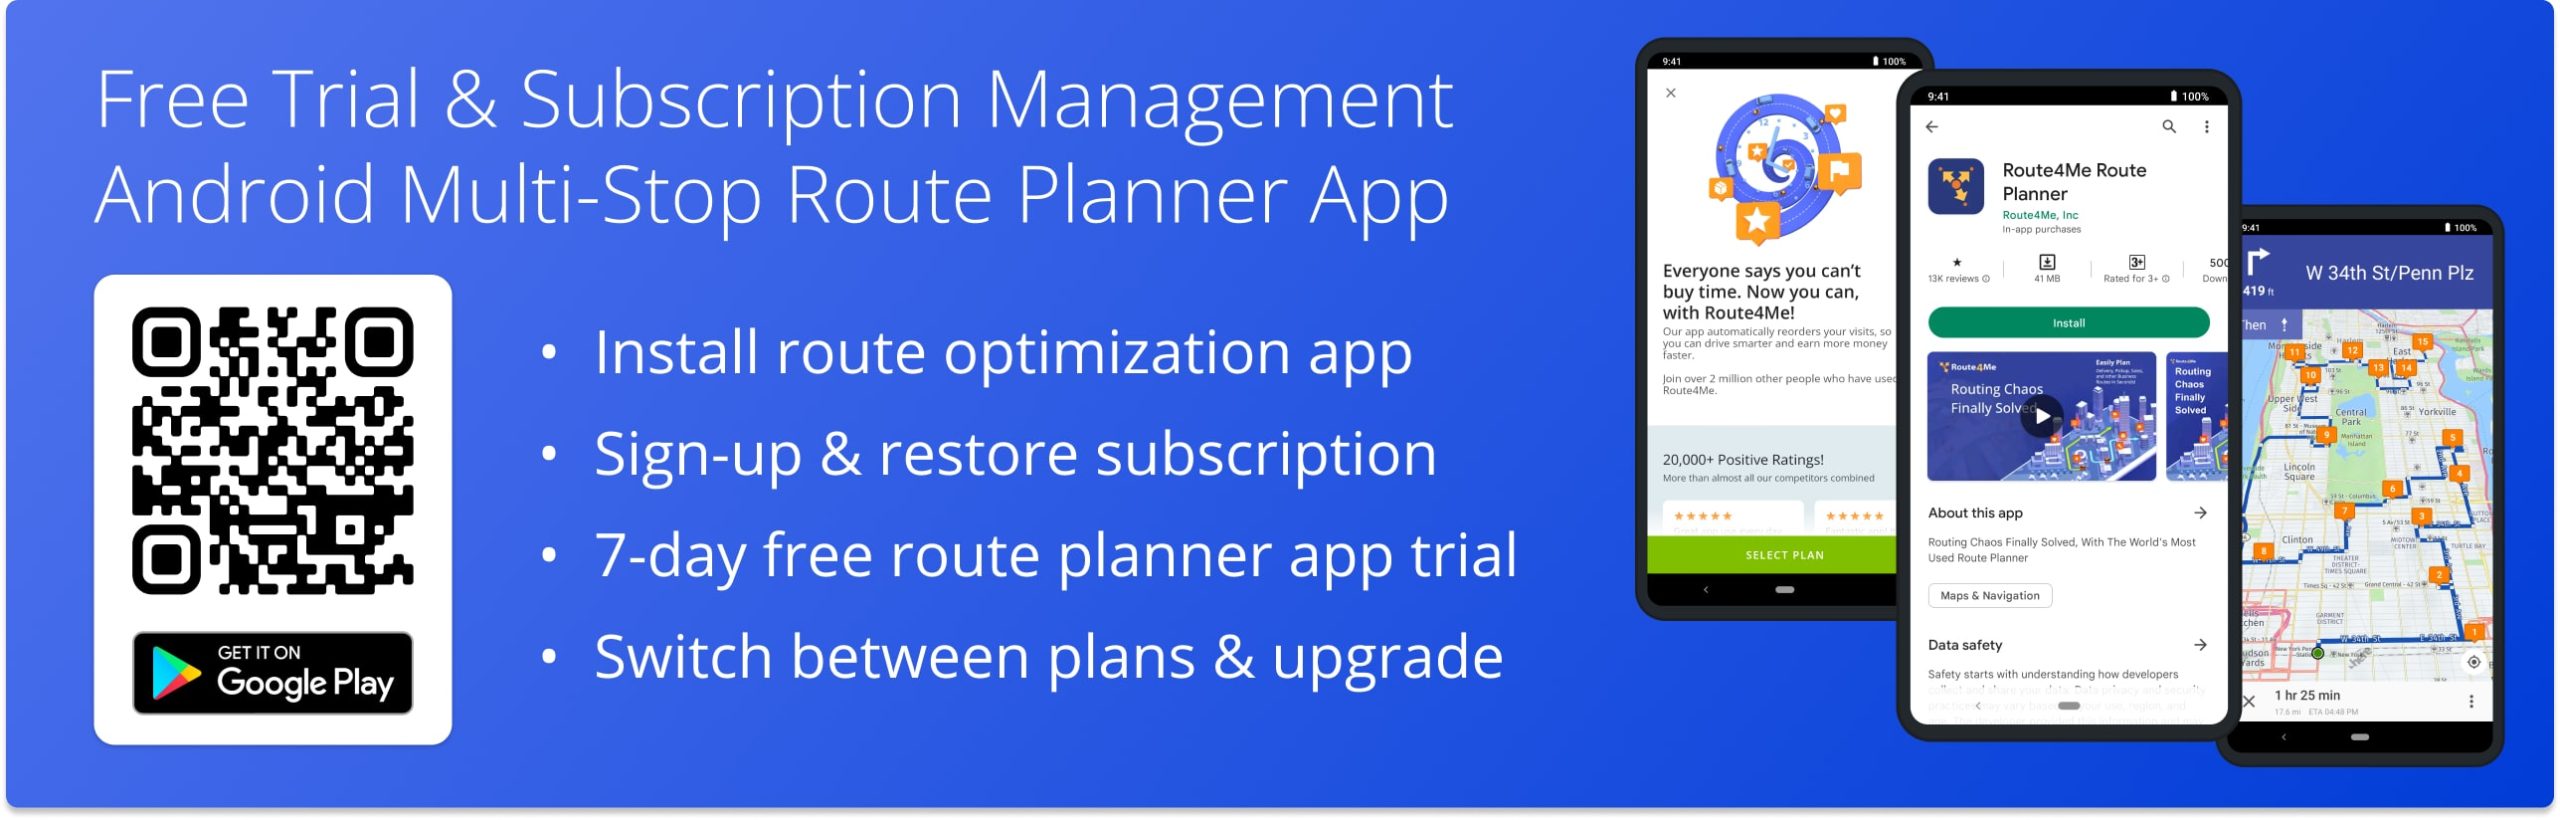 Free route planner app trial and Mobile subscription management on Route4Me's Android Multi-Address Route Optimization app.